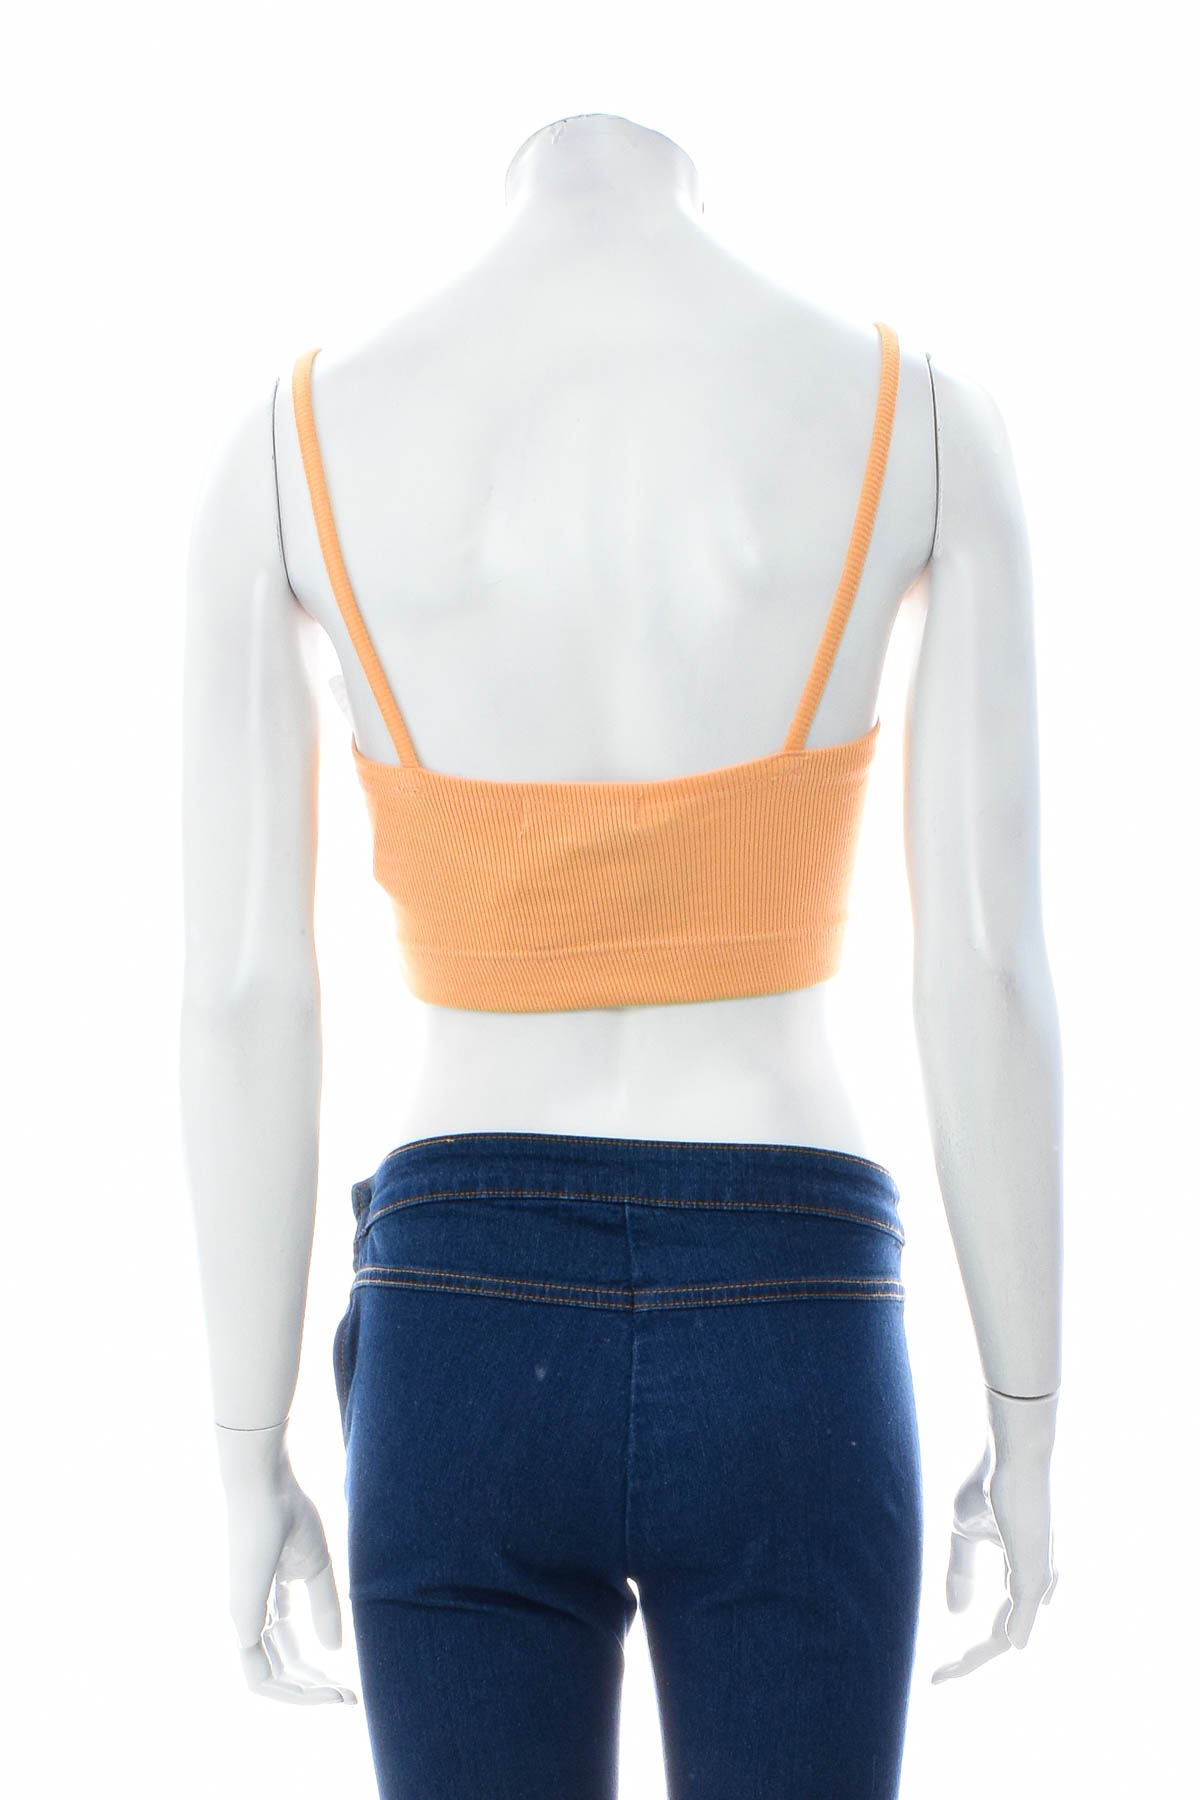 Women's top - Re_Styld - 1